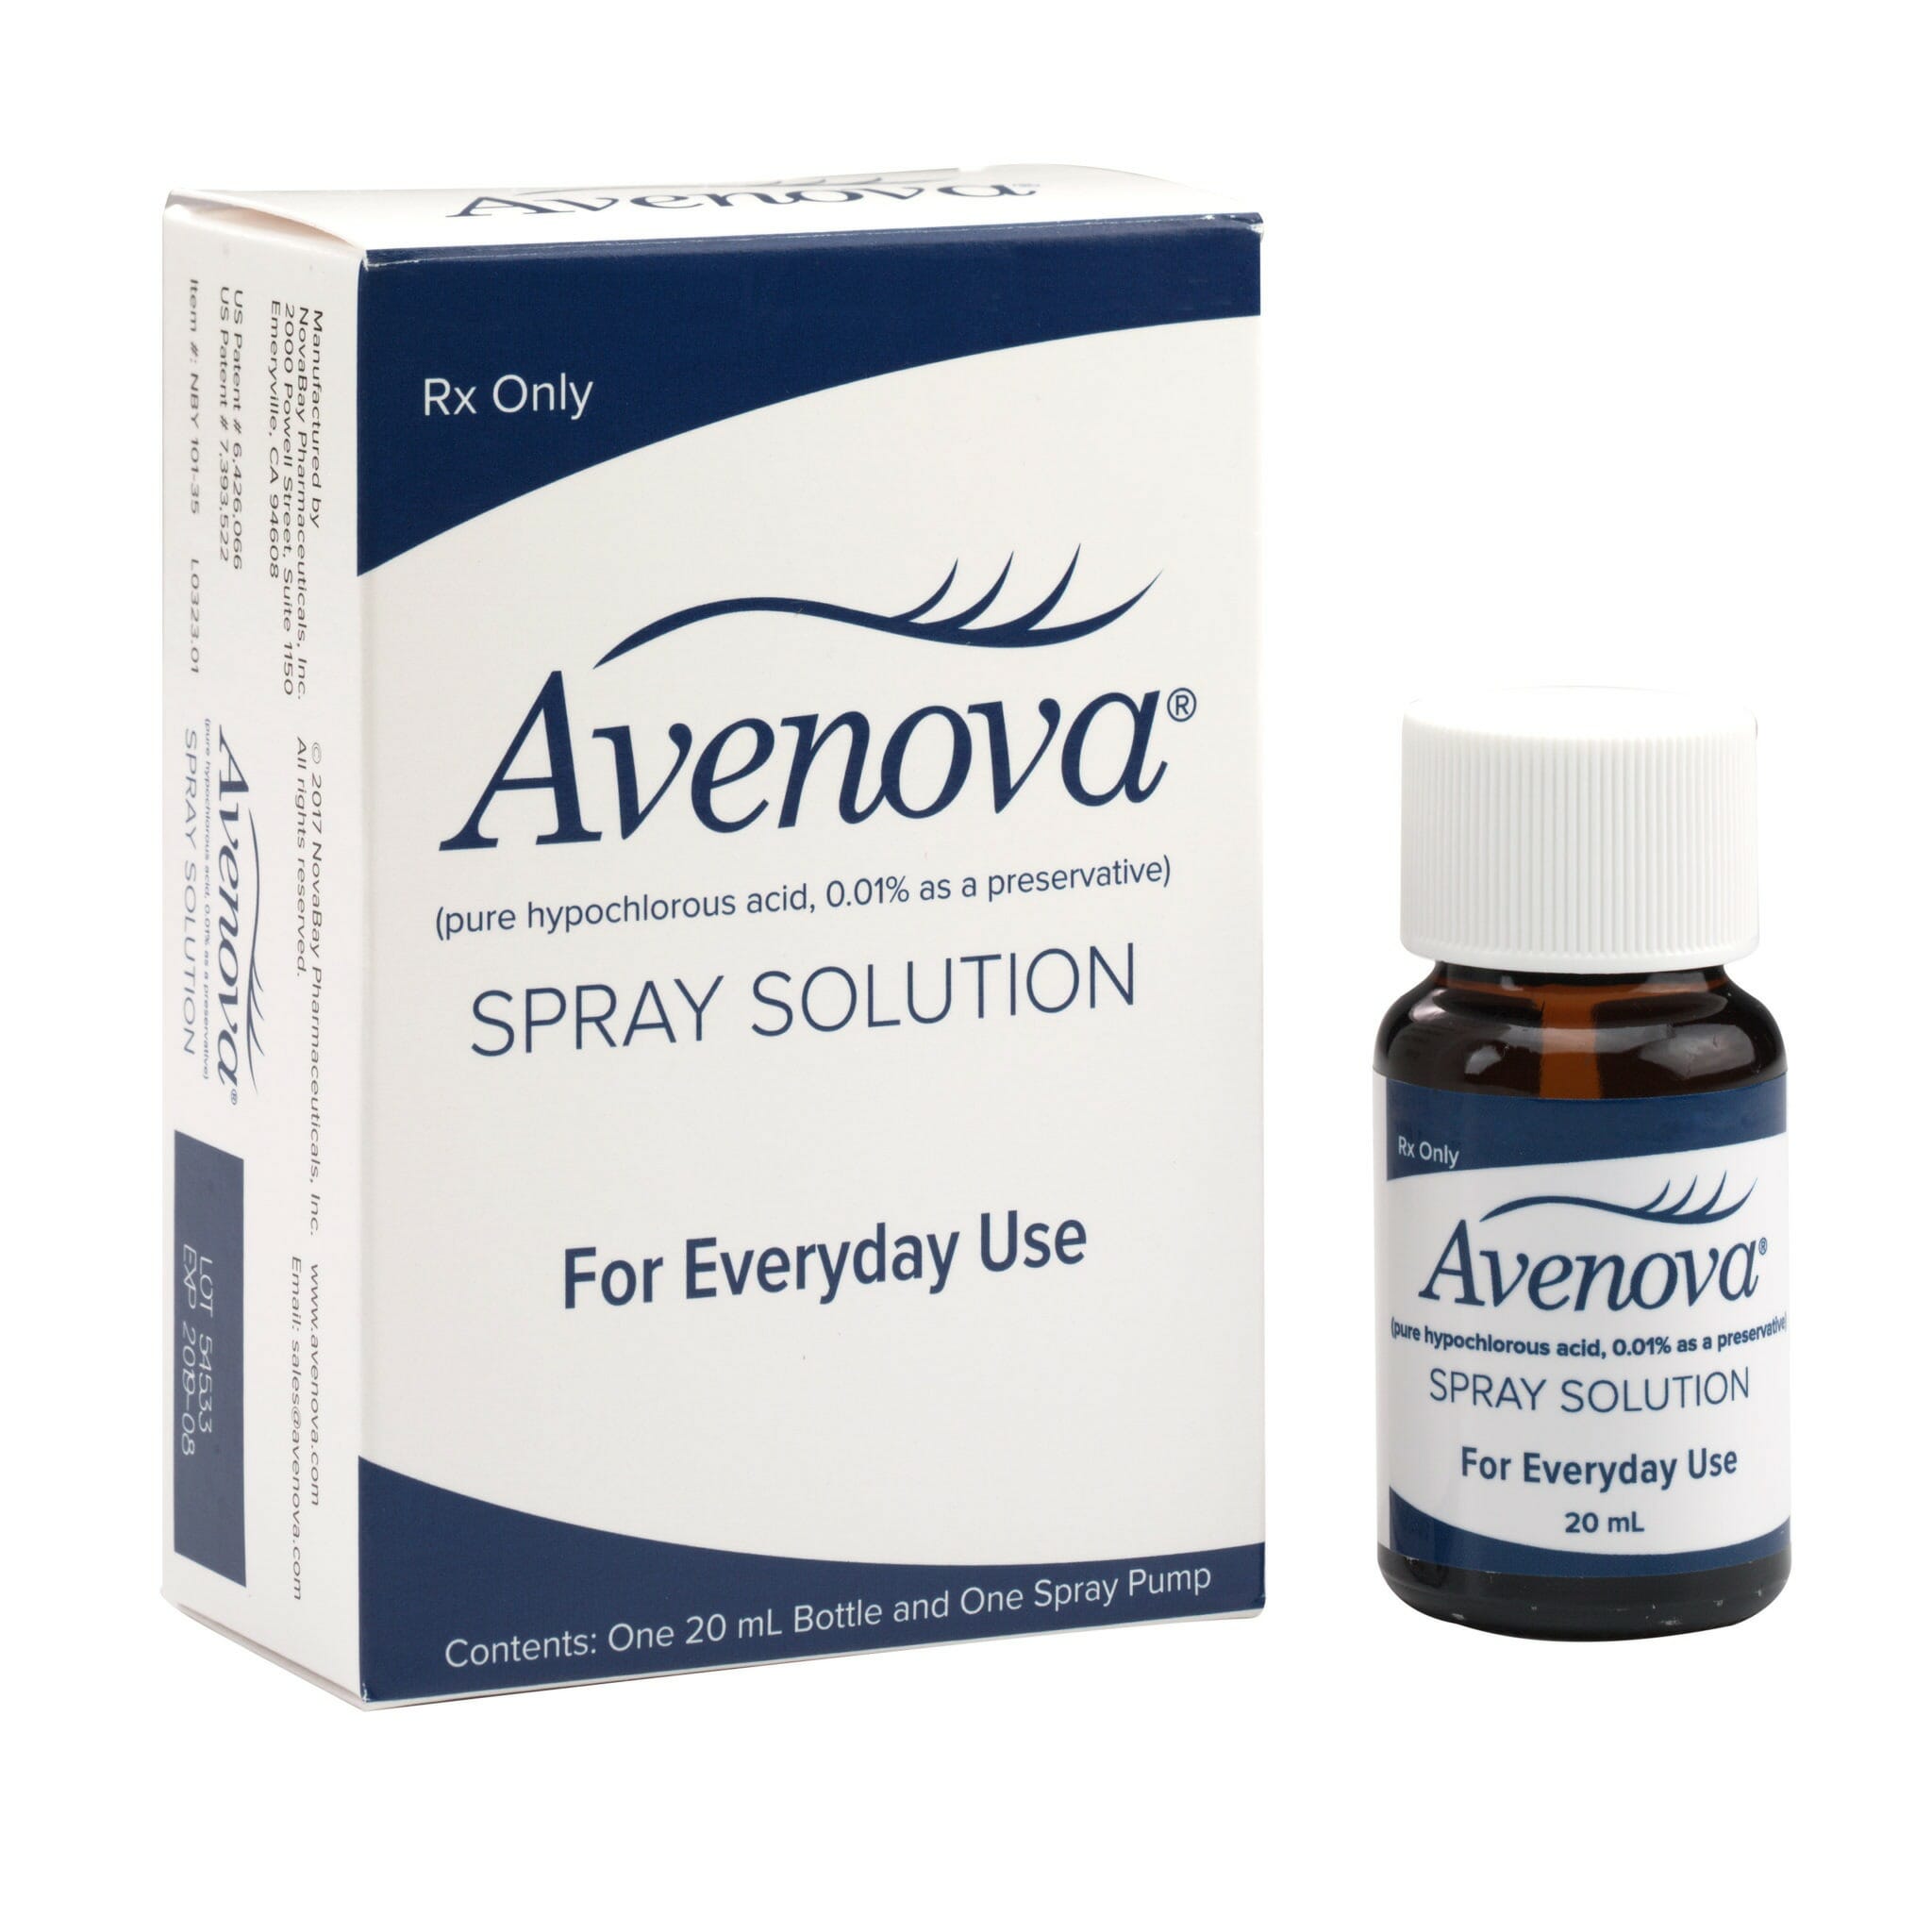 Is Avenova Eyelid Cleanser an effective product for eye-lid cleansing?